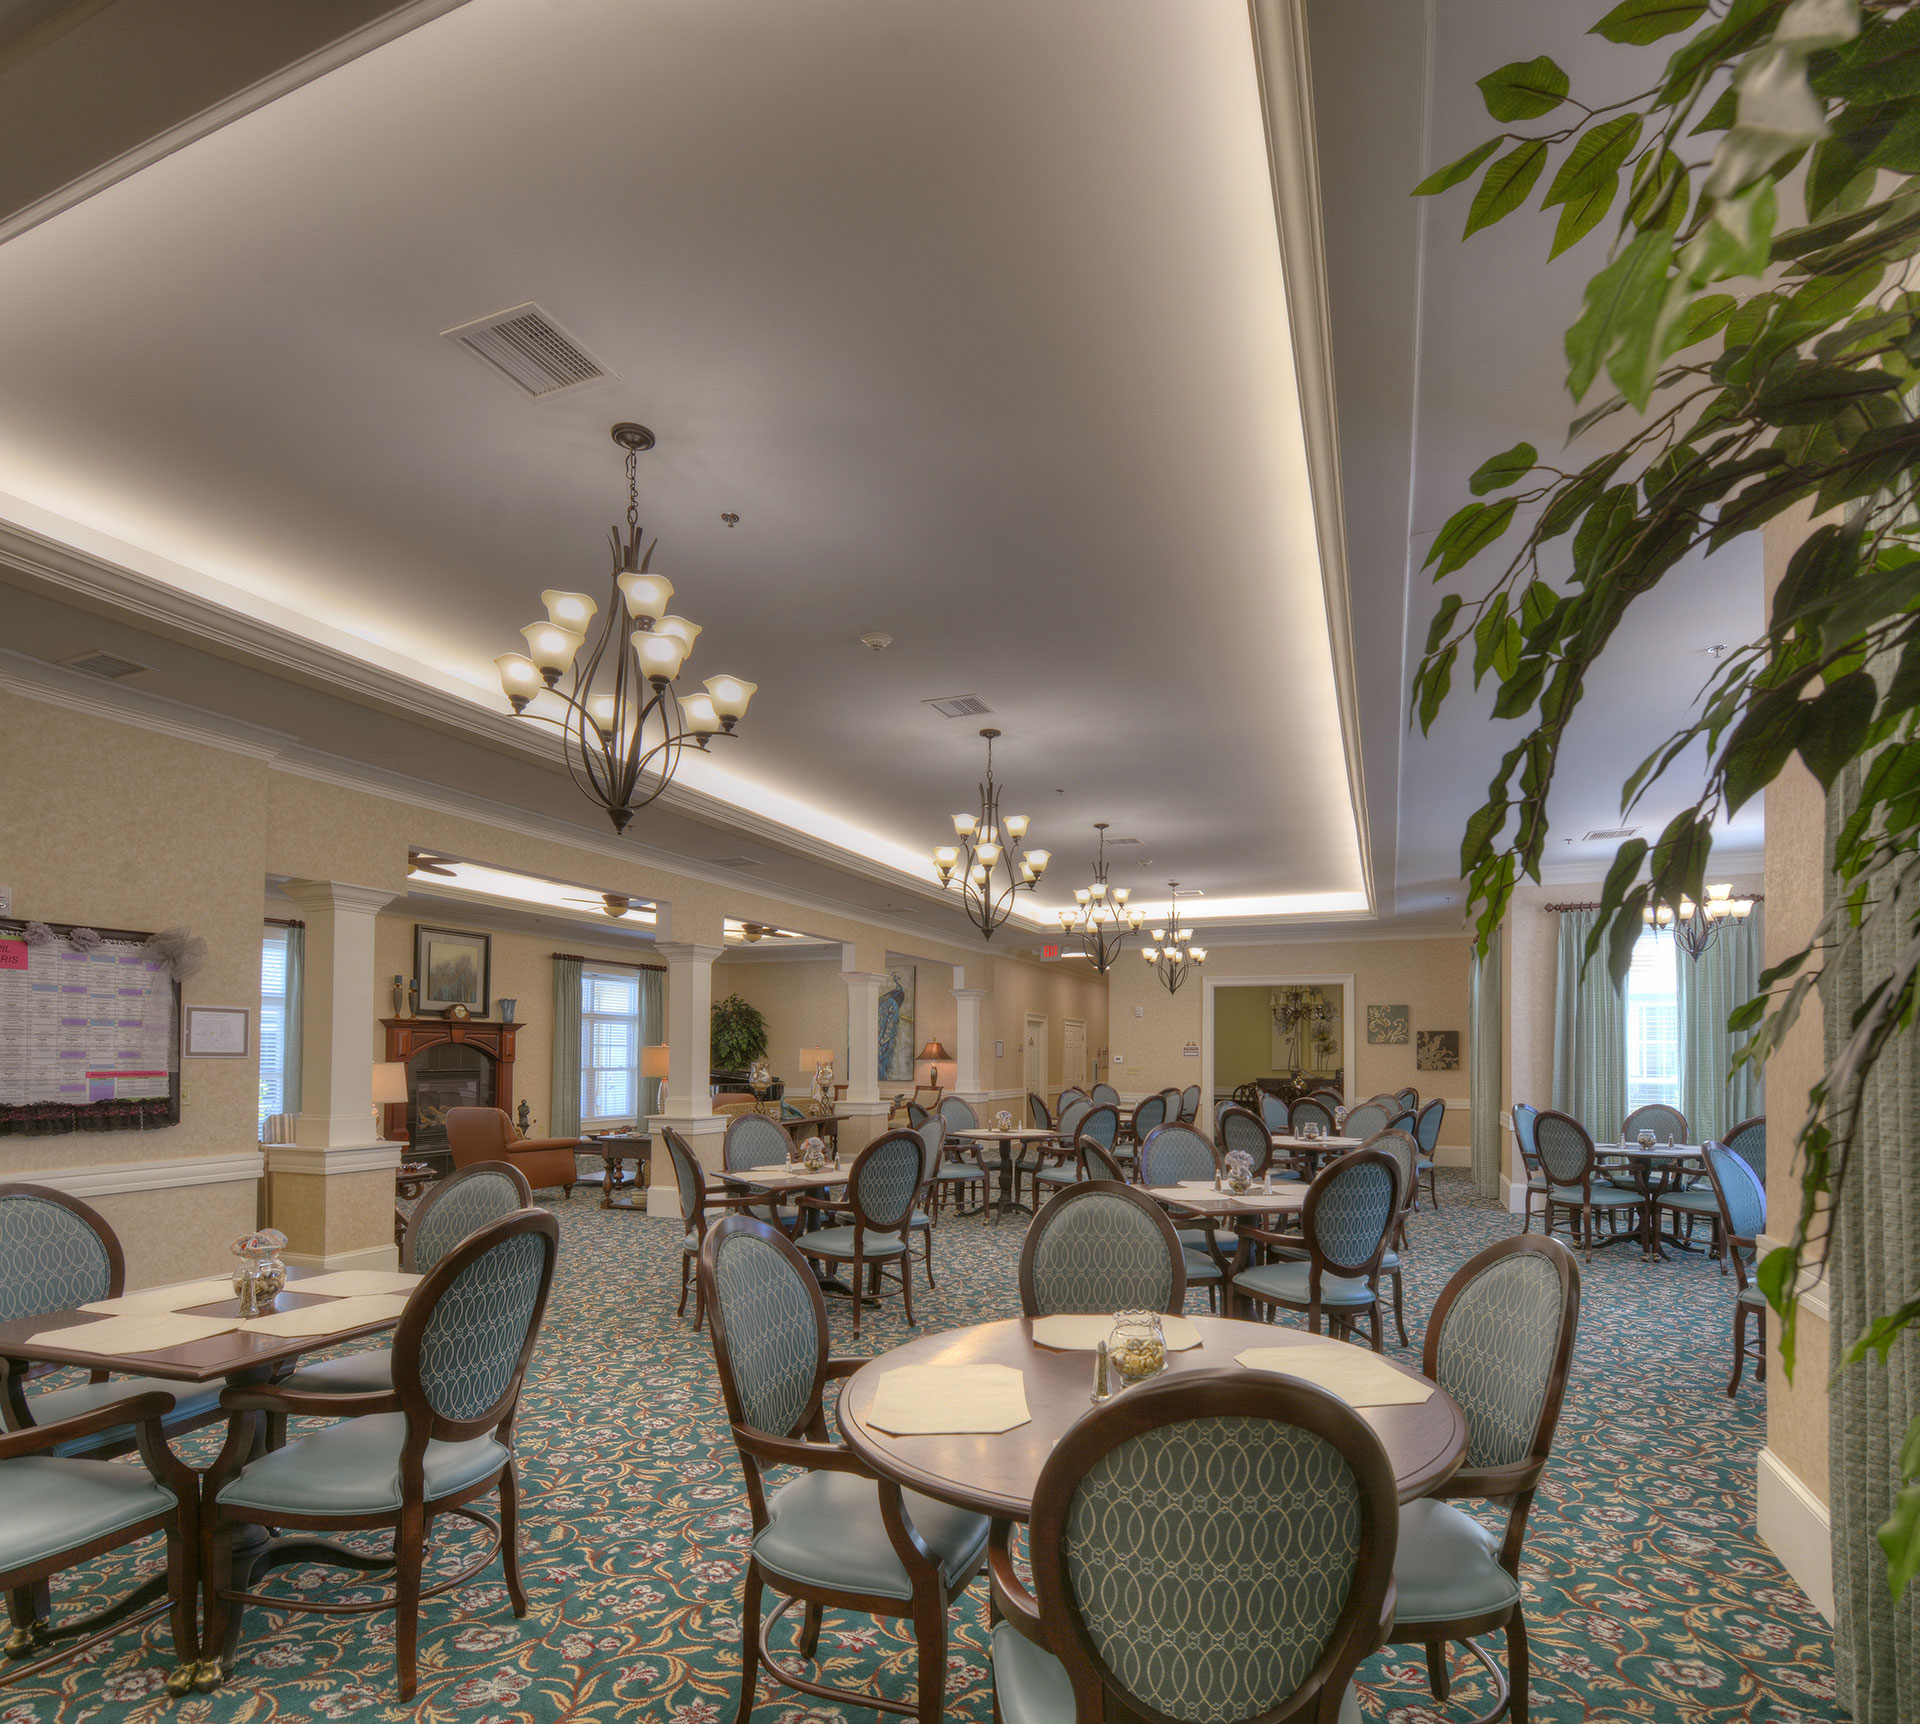 Assisted Living Facilities in Clermont - Community dining room